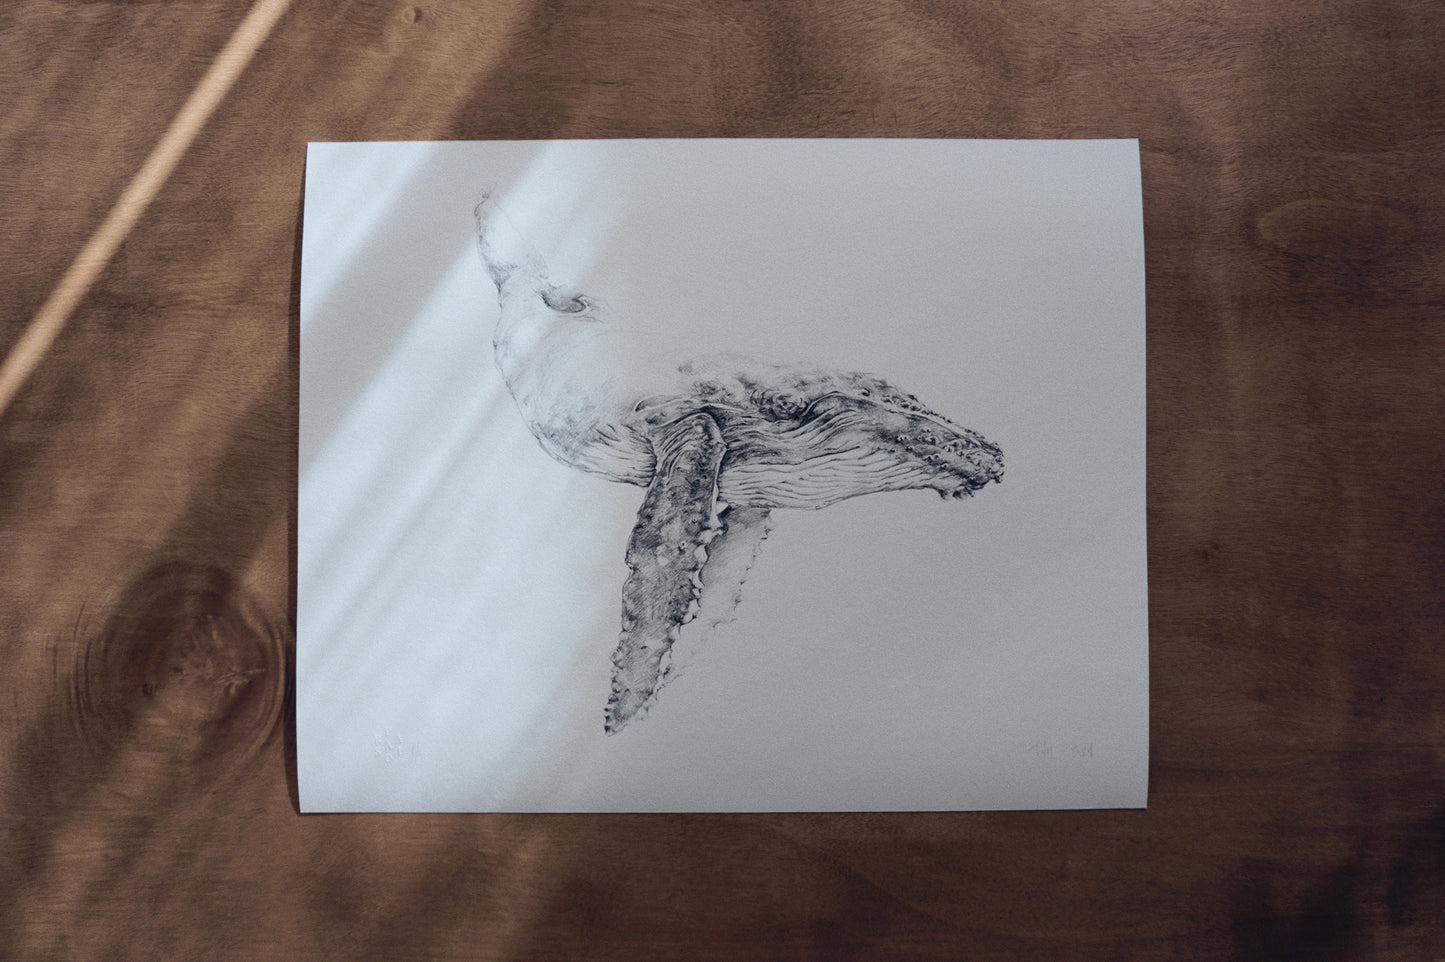 pencil drawing of humpback whale by antonia reyes montealegre, wildlife artist, chile